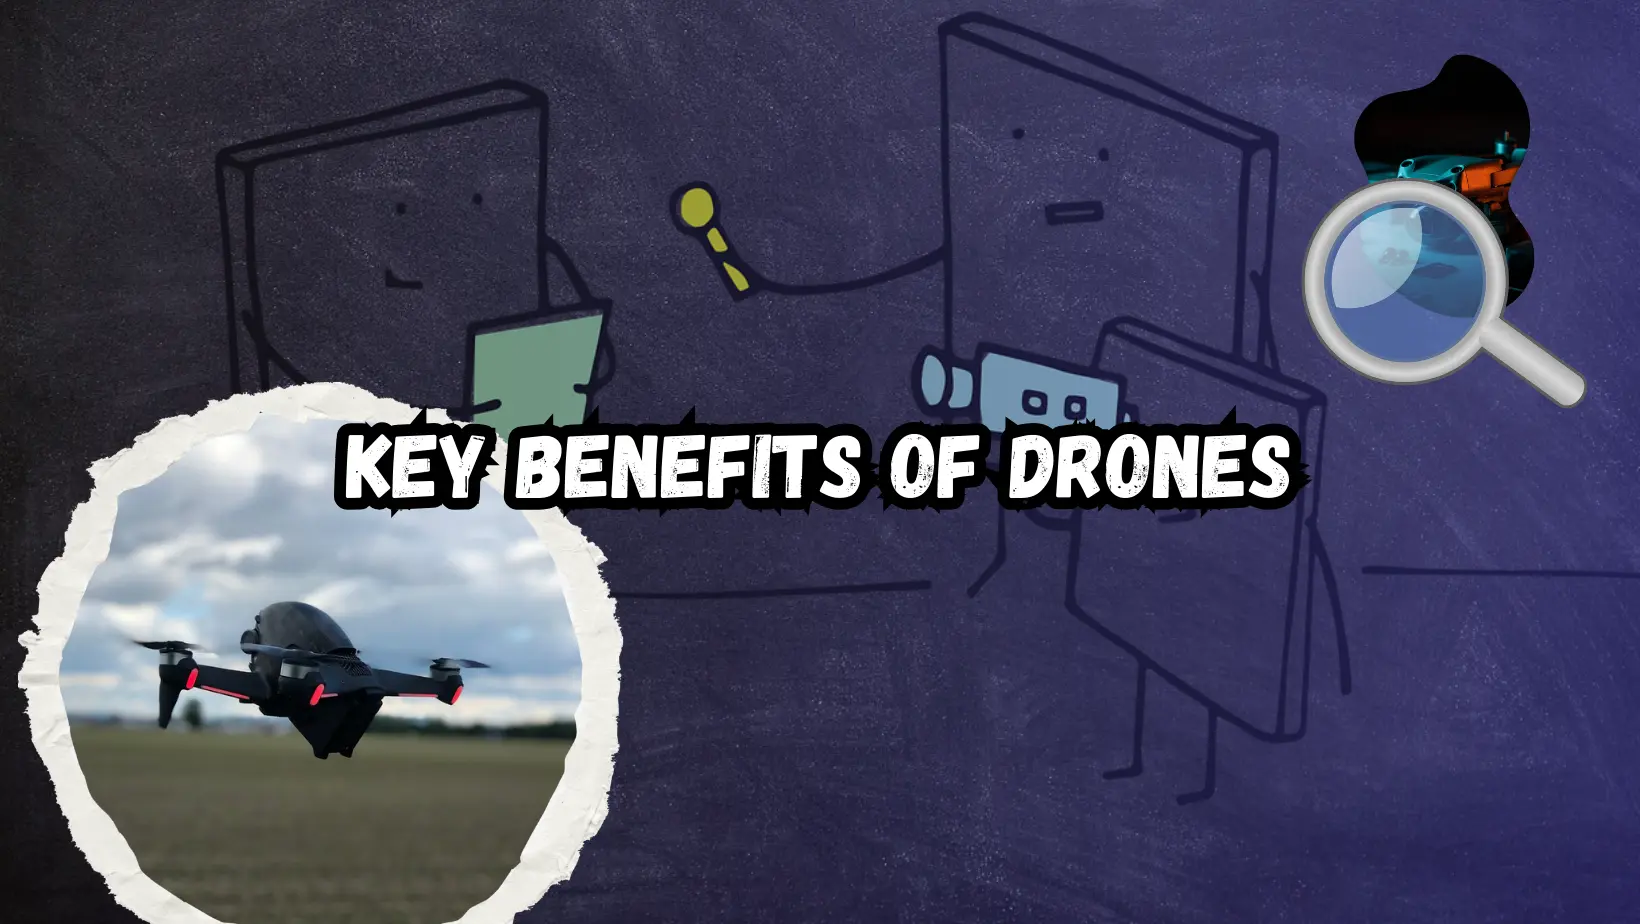 Key-Benefits-of-Drones-Drones-for-insurance-inspections